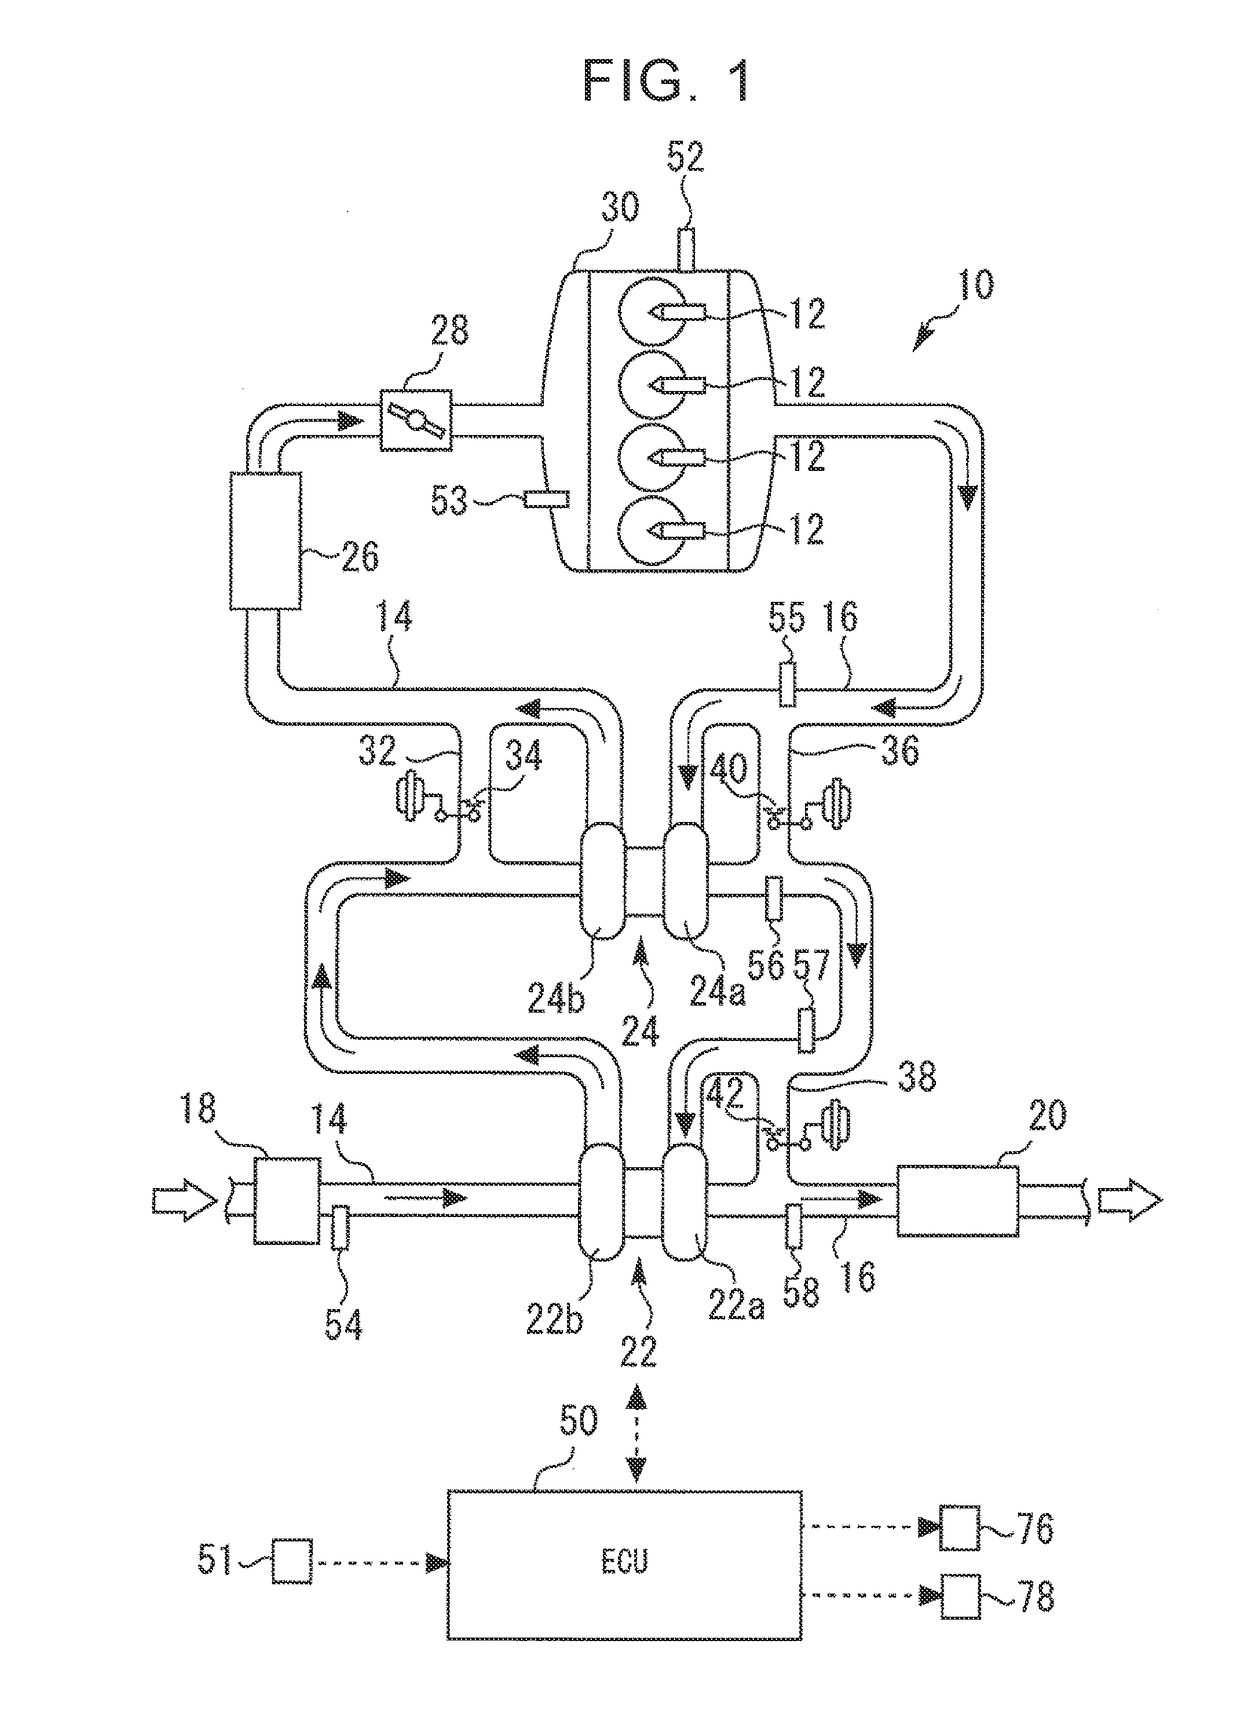 Control device for internal combustion engine including turbocharger